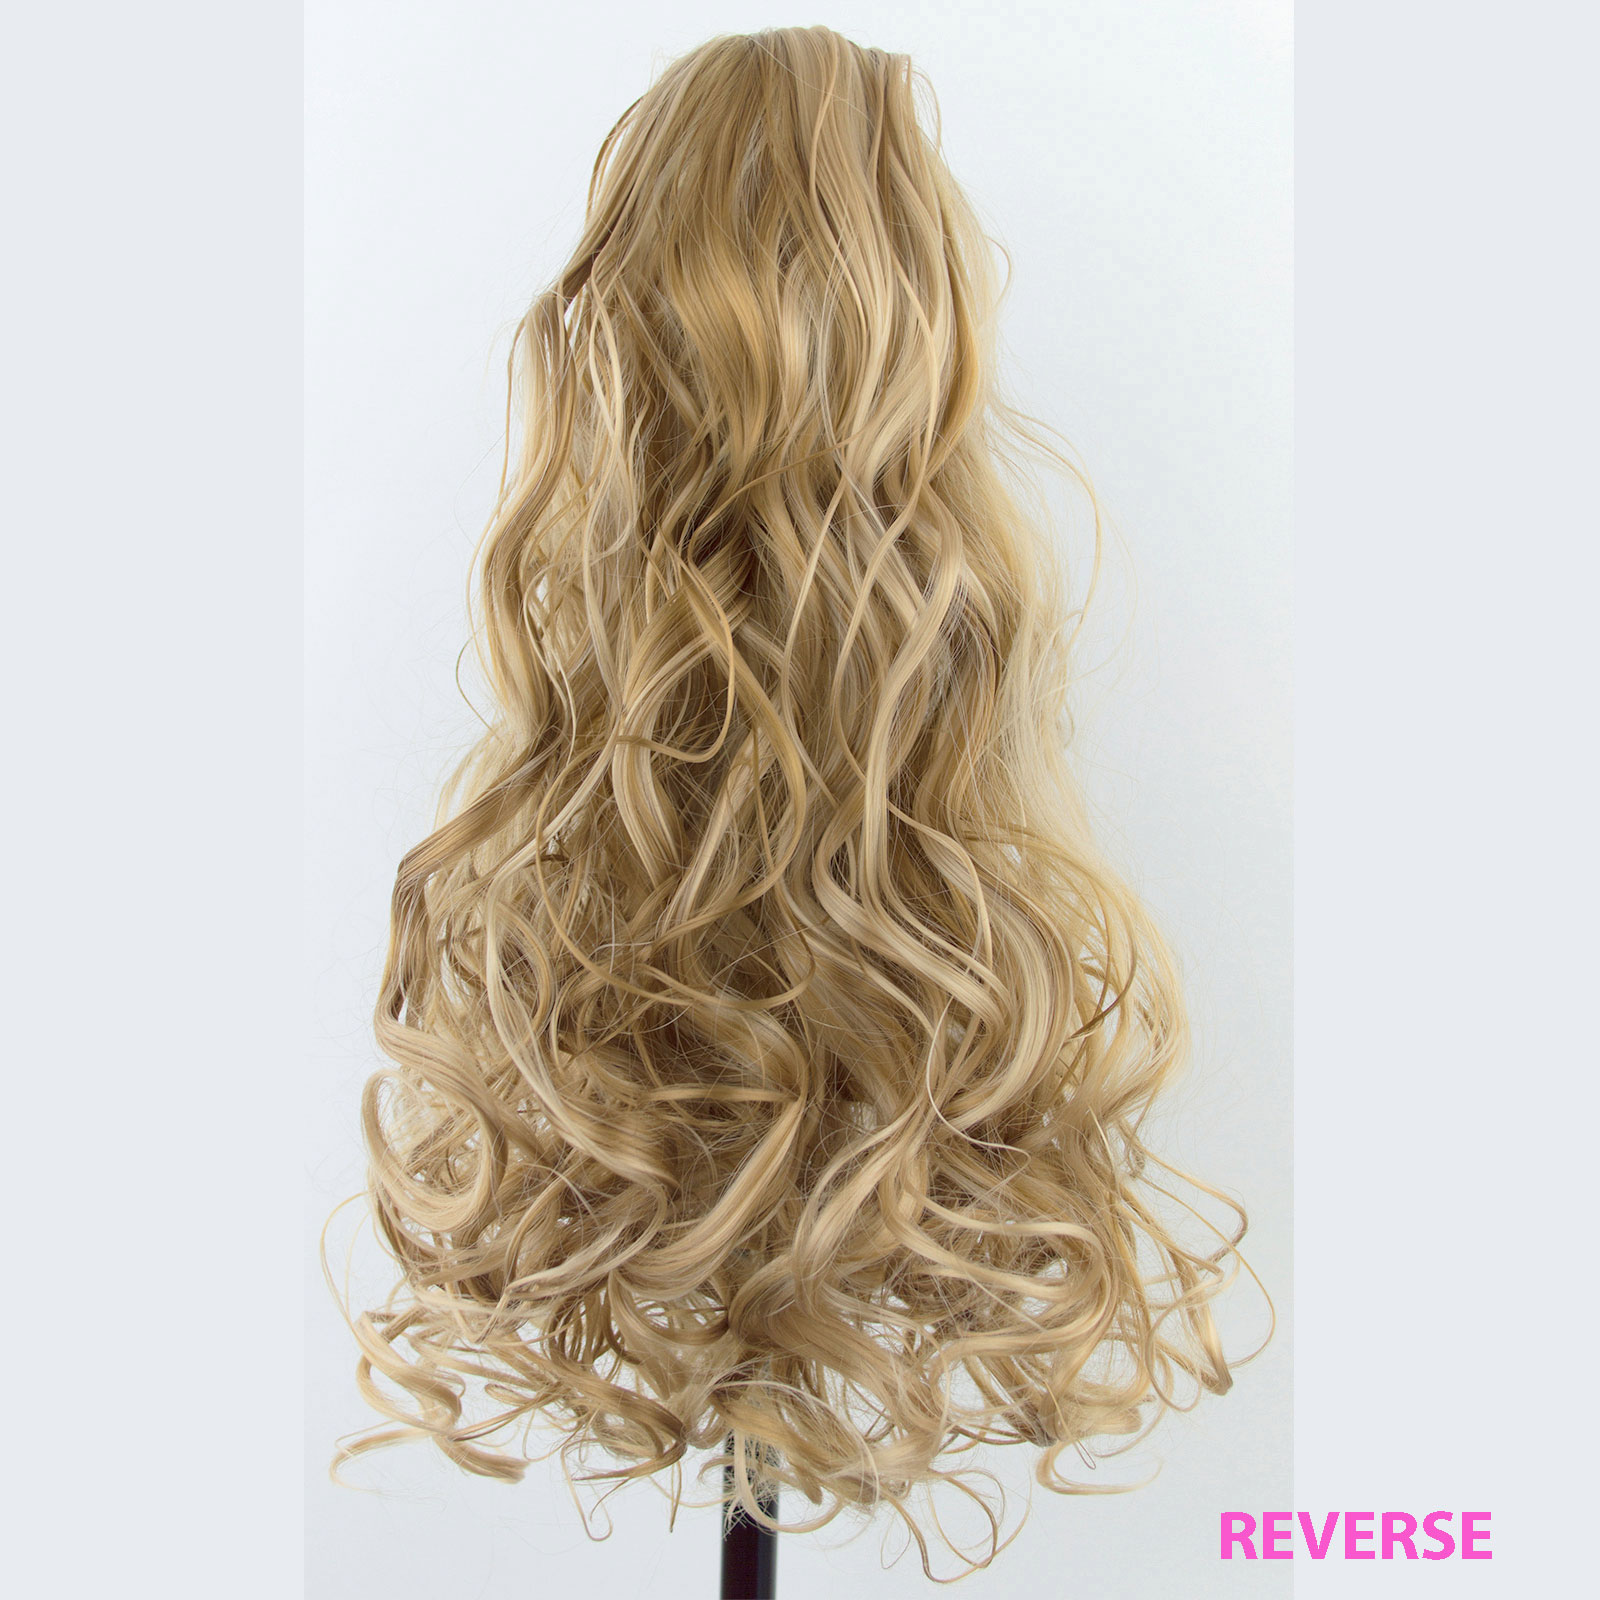 PONYTAIL Clip In Hair Extensions Blonde Mix 18 613 REVERSIBLE 4